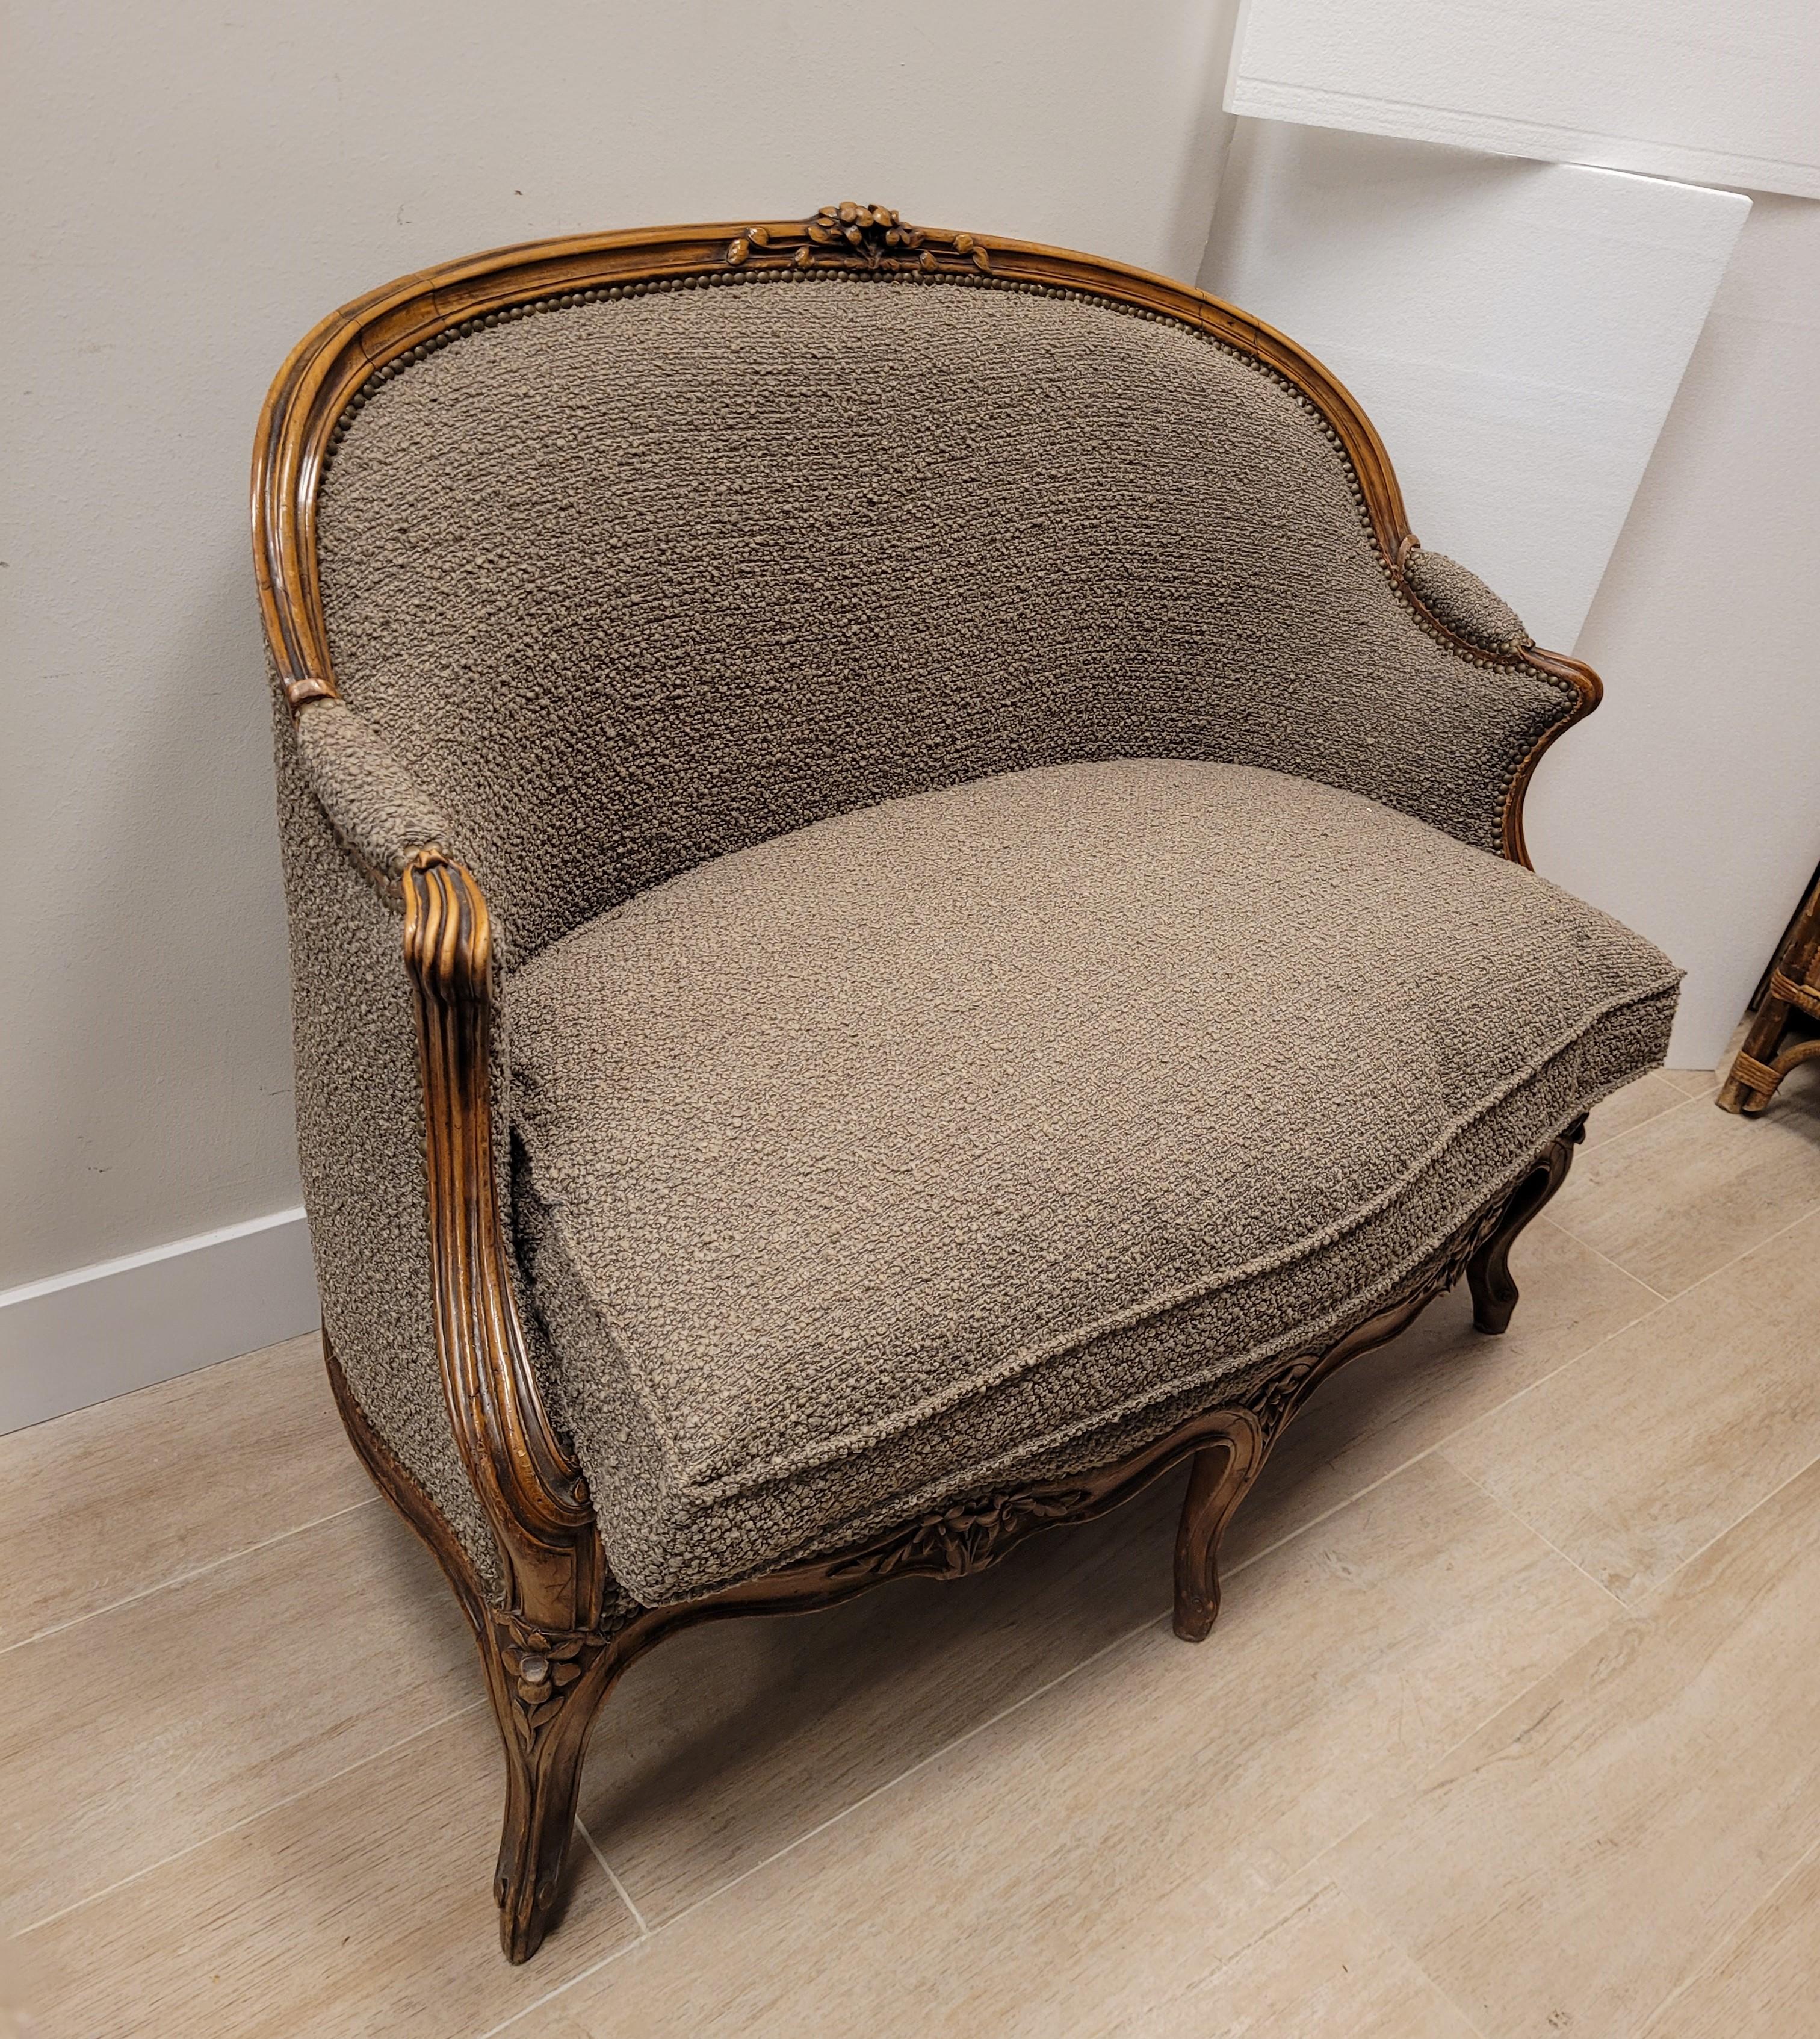 Gorgeous Canapé- sofá en Corbeille, in Louis XV style, made of carved walnut wood with plant decorations and 19th century , recently  re-upholstery in mink color loop wool or wool bouclé. The Corbeille settee is a type of settee with an oval base,